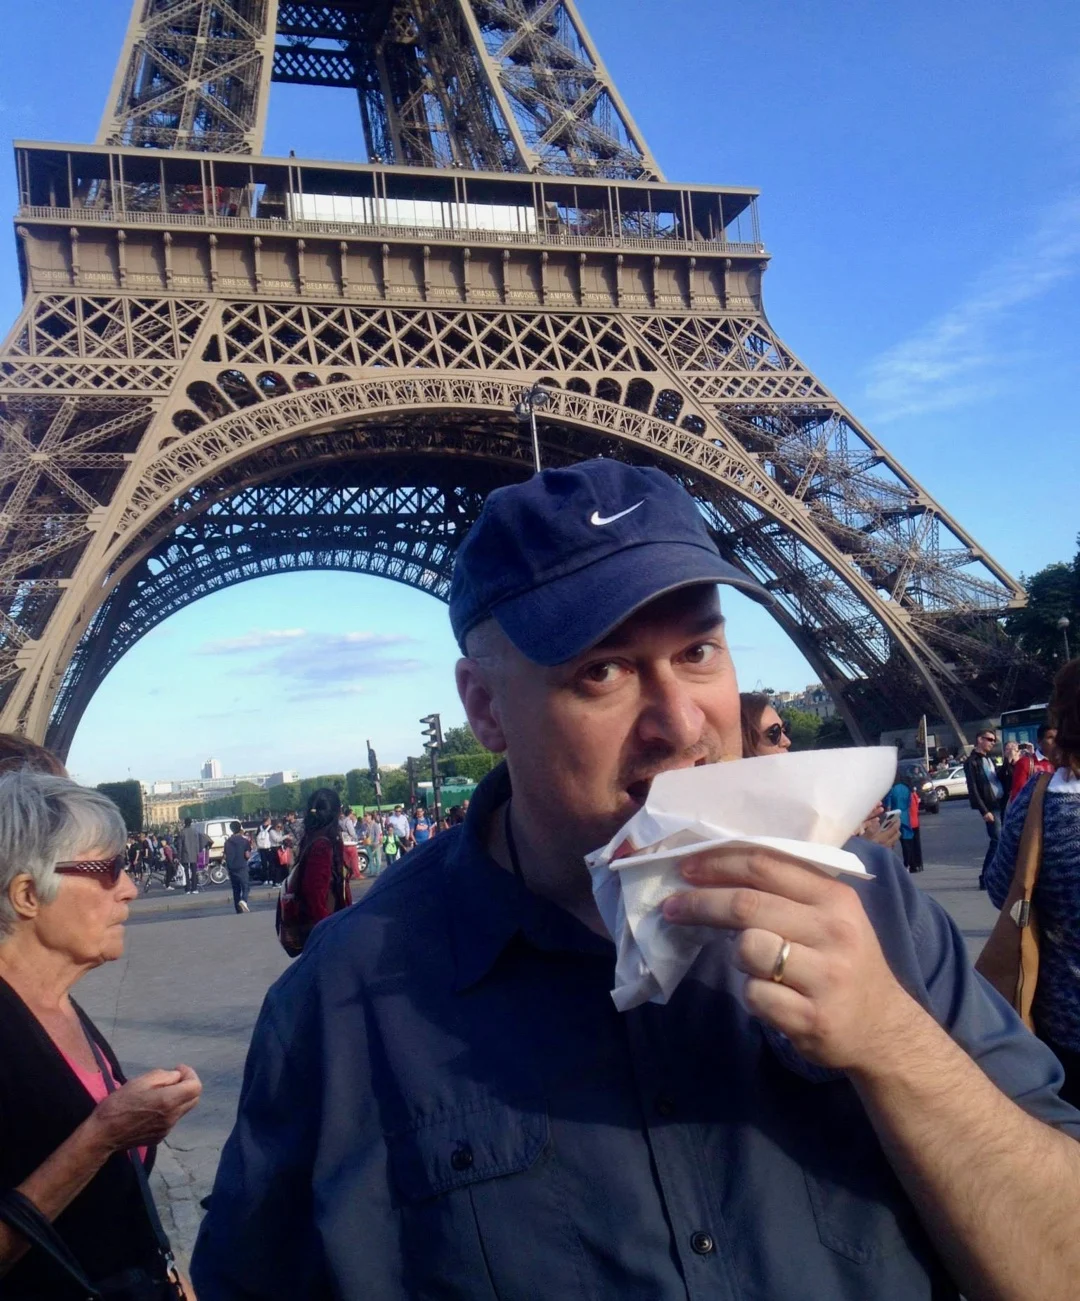 Eating a Nutella crepe at the Eiffel Tower in Paris.